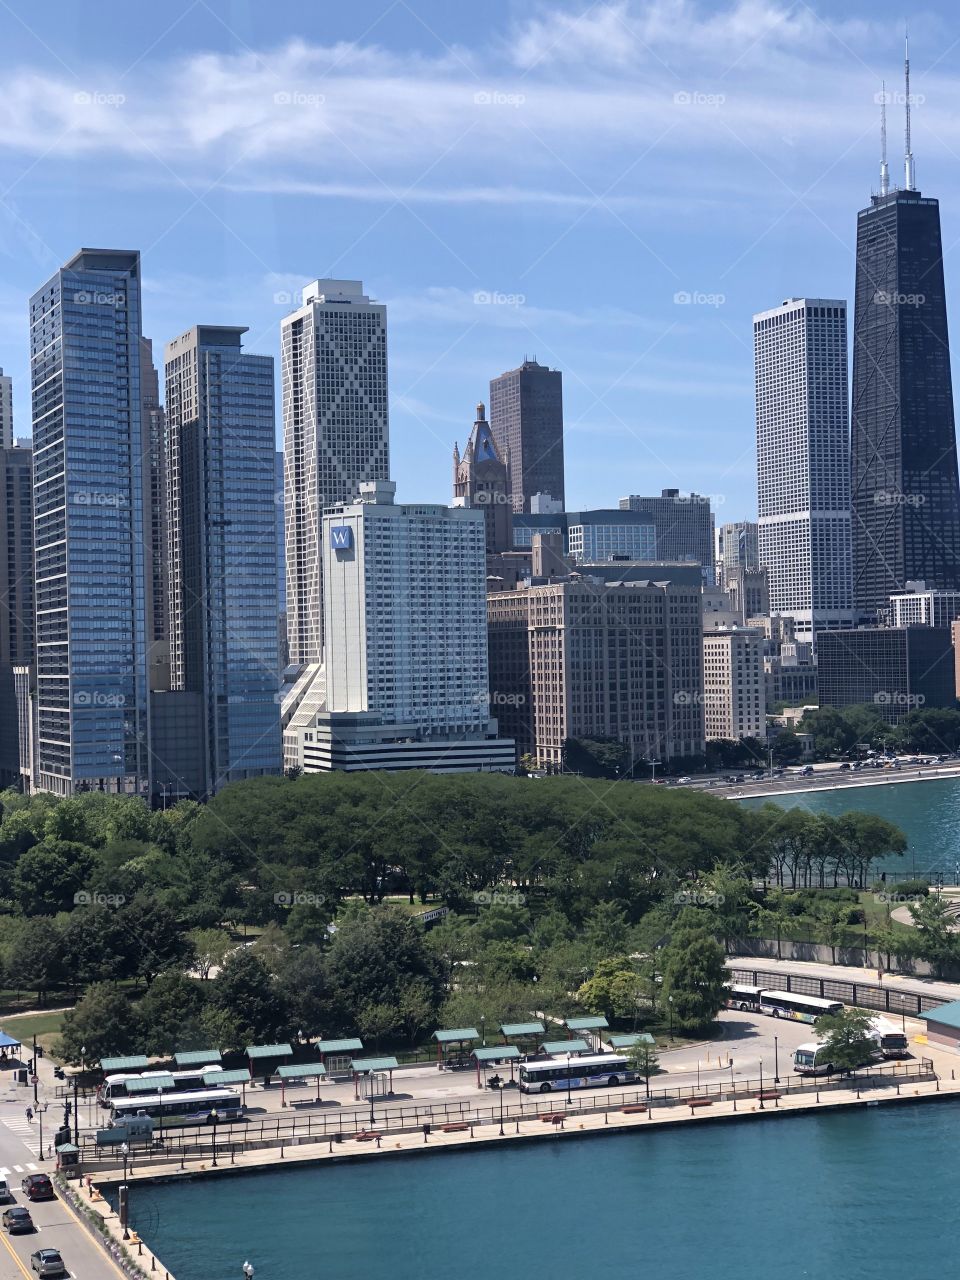 Part of the Chicago skyline 